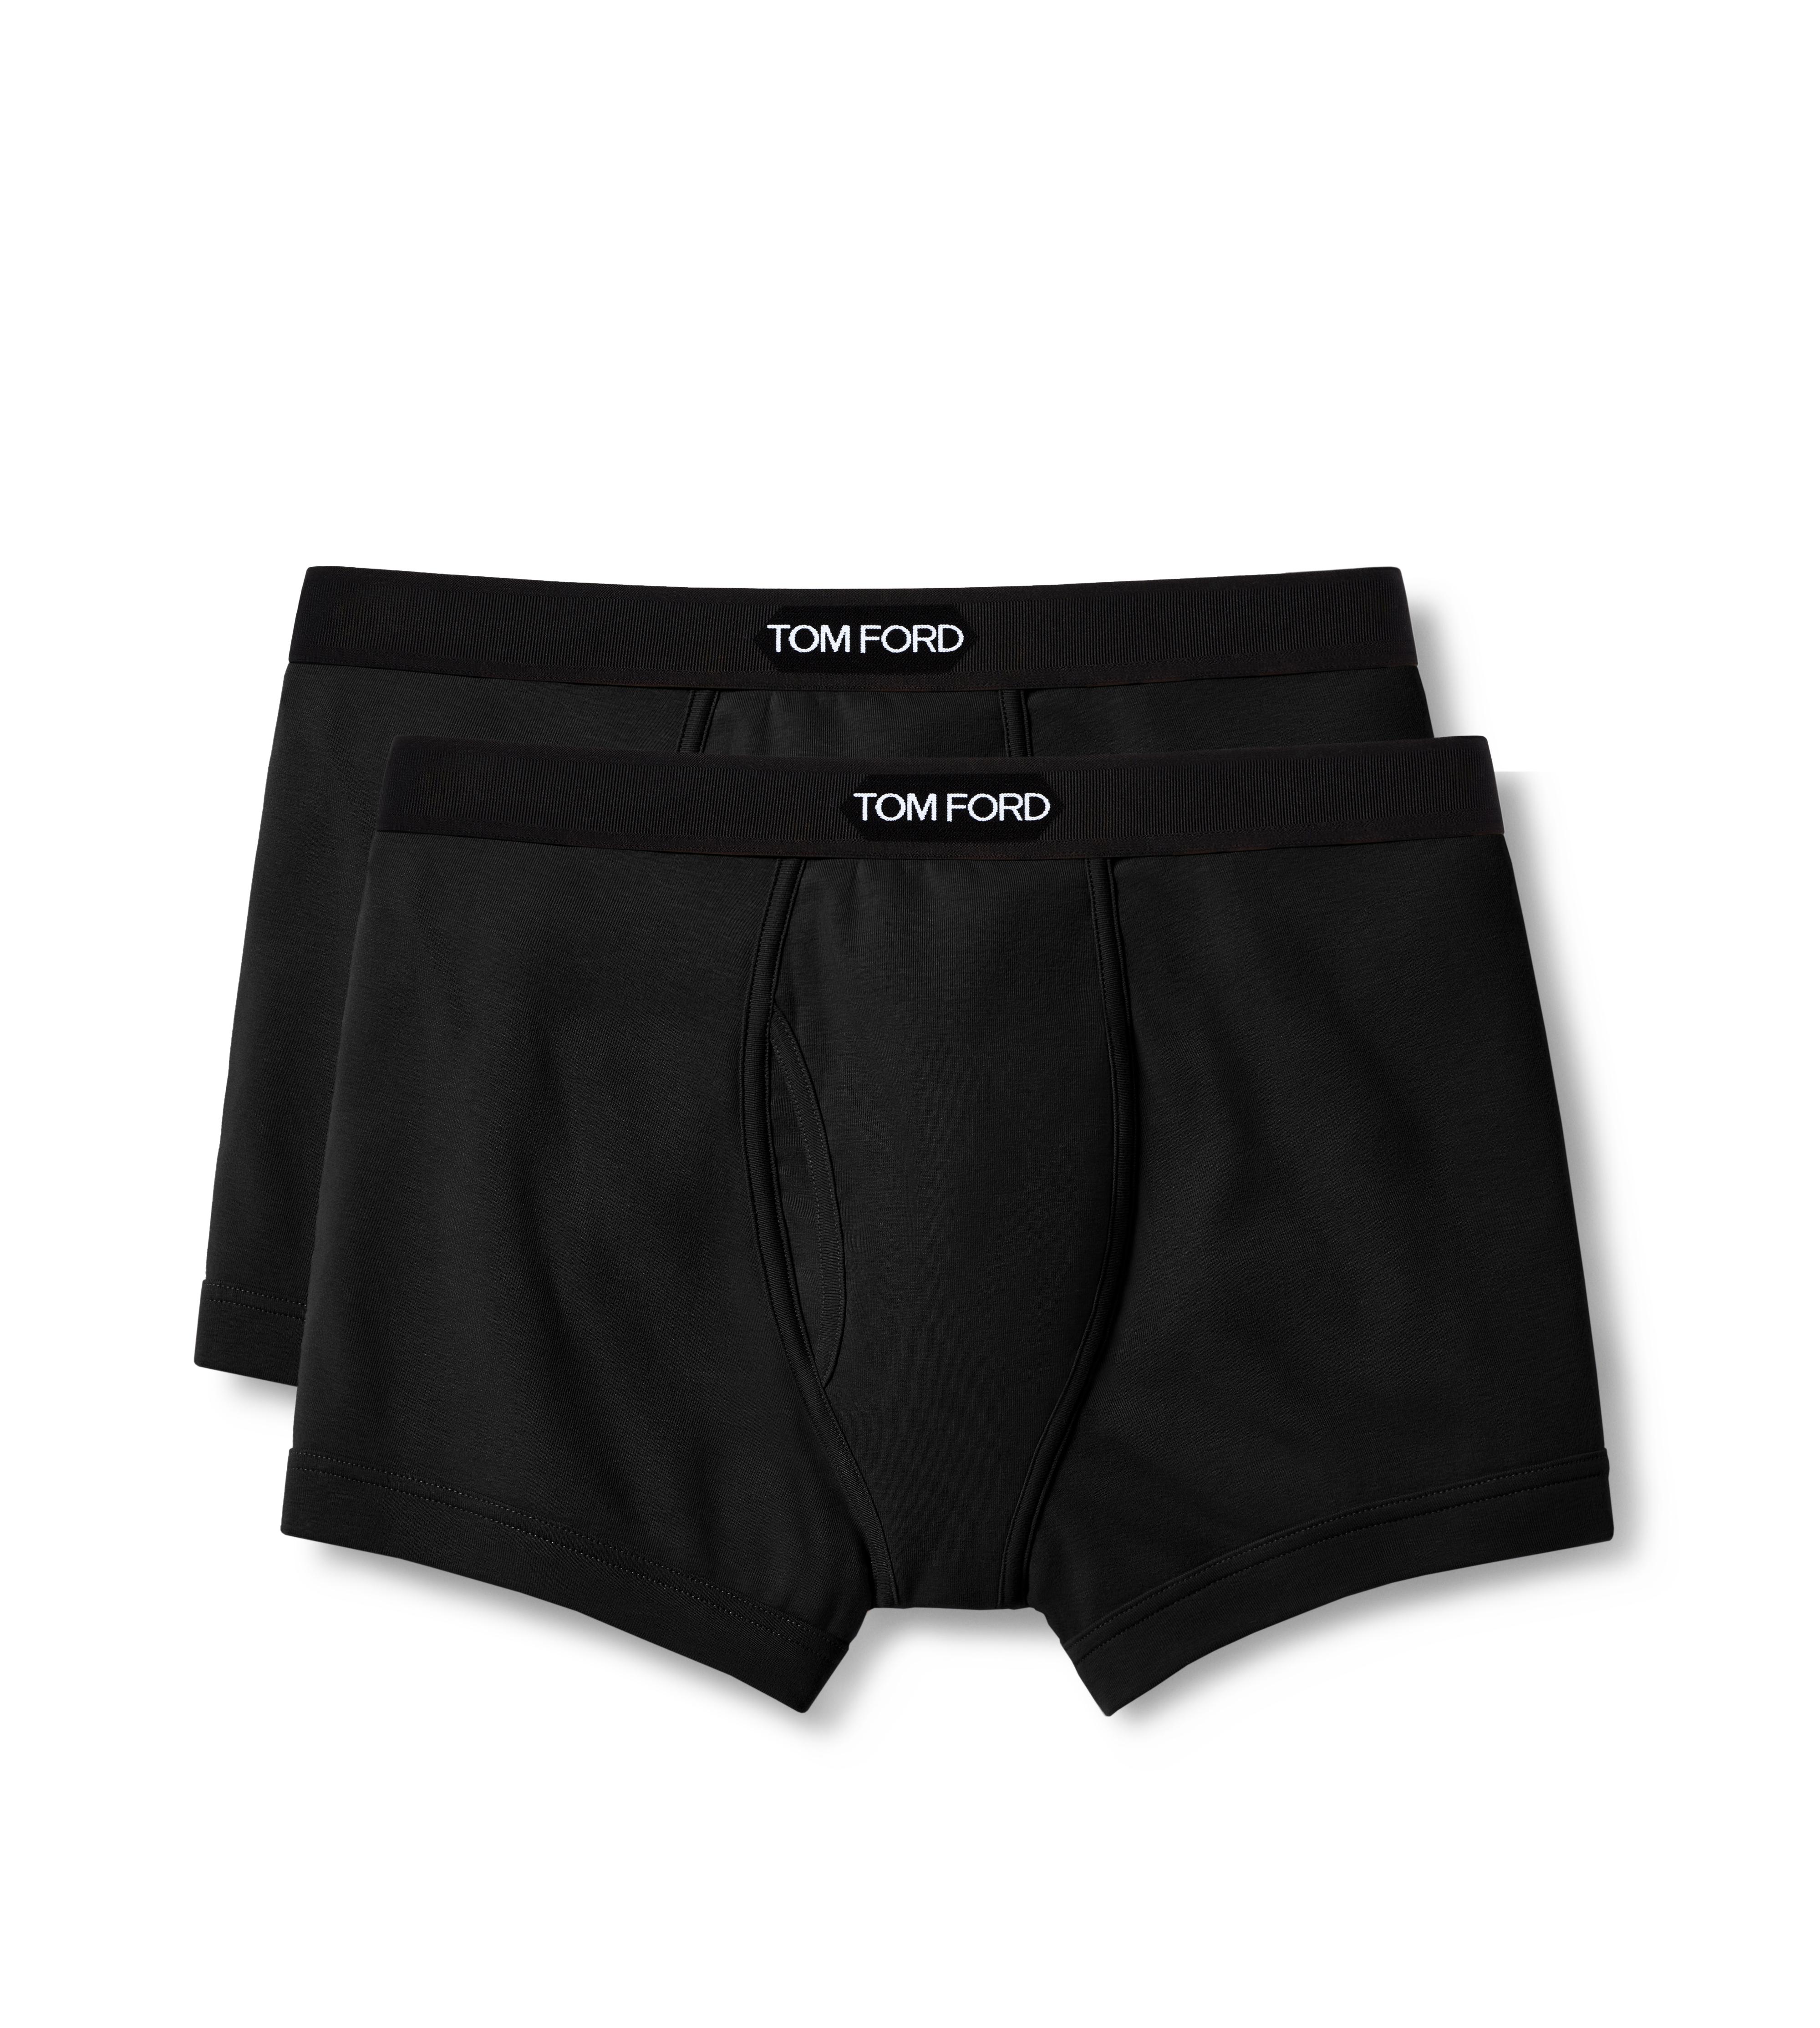 Tom Ford COTTON BOXER TWO PACK | TomFord.com